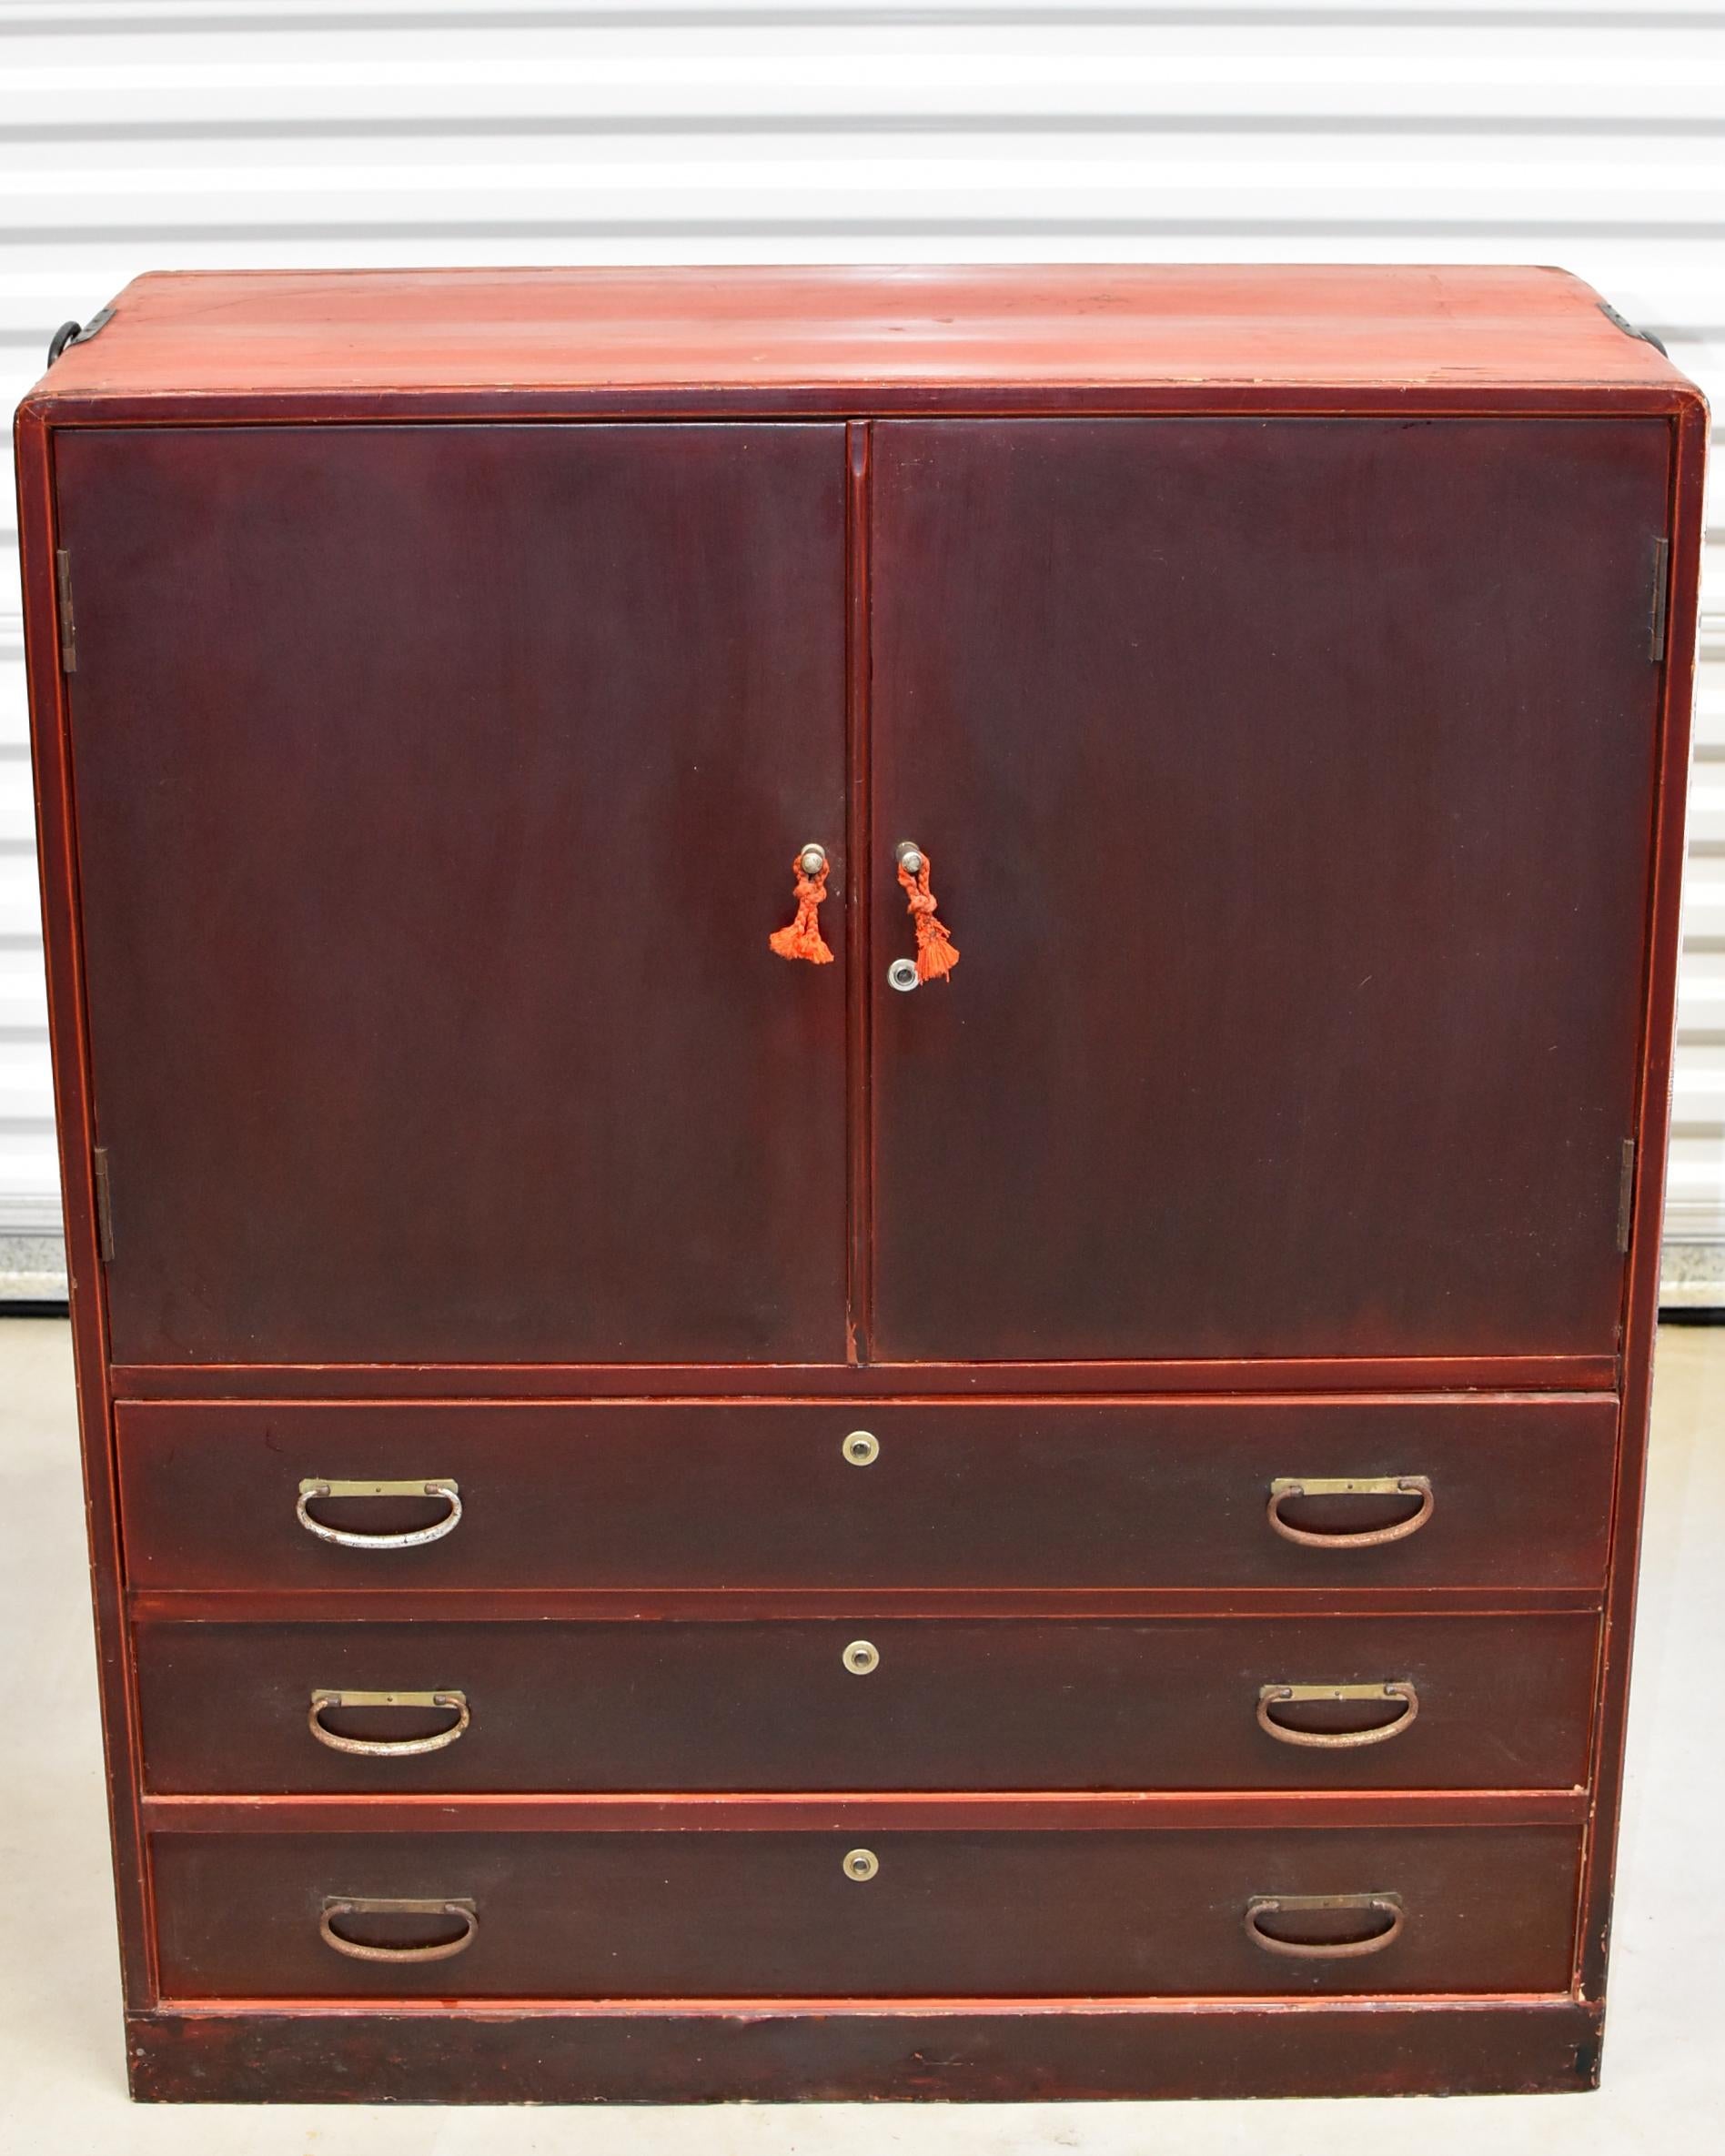 A beautiful vintage round corner Japanese Tansu with four shallow pullout trays and three full capacity drawers. The finish is an unique reddish hued brown, with the contrast from the brass hardware creates a fantastic visual impact. Retractable